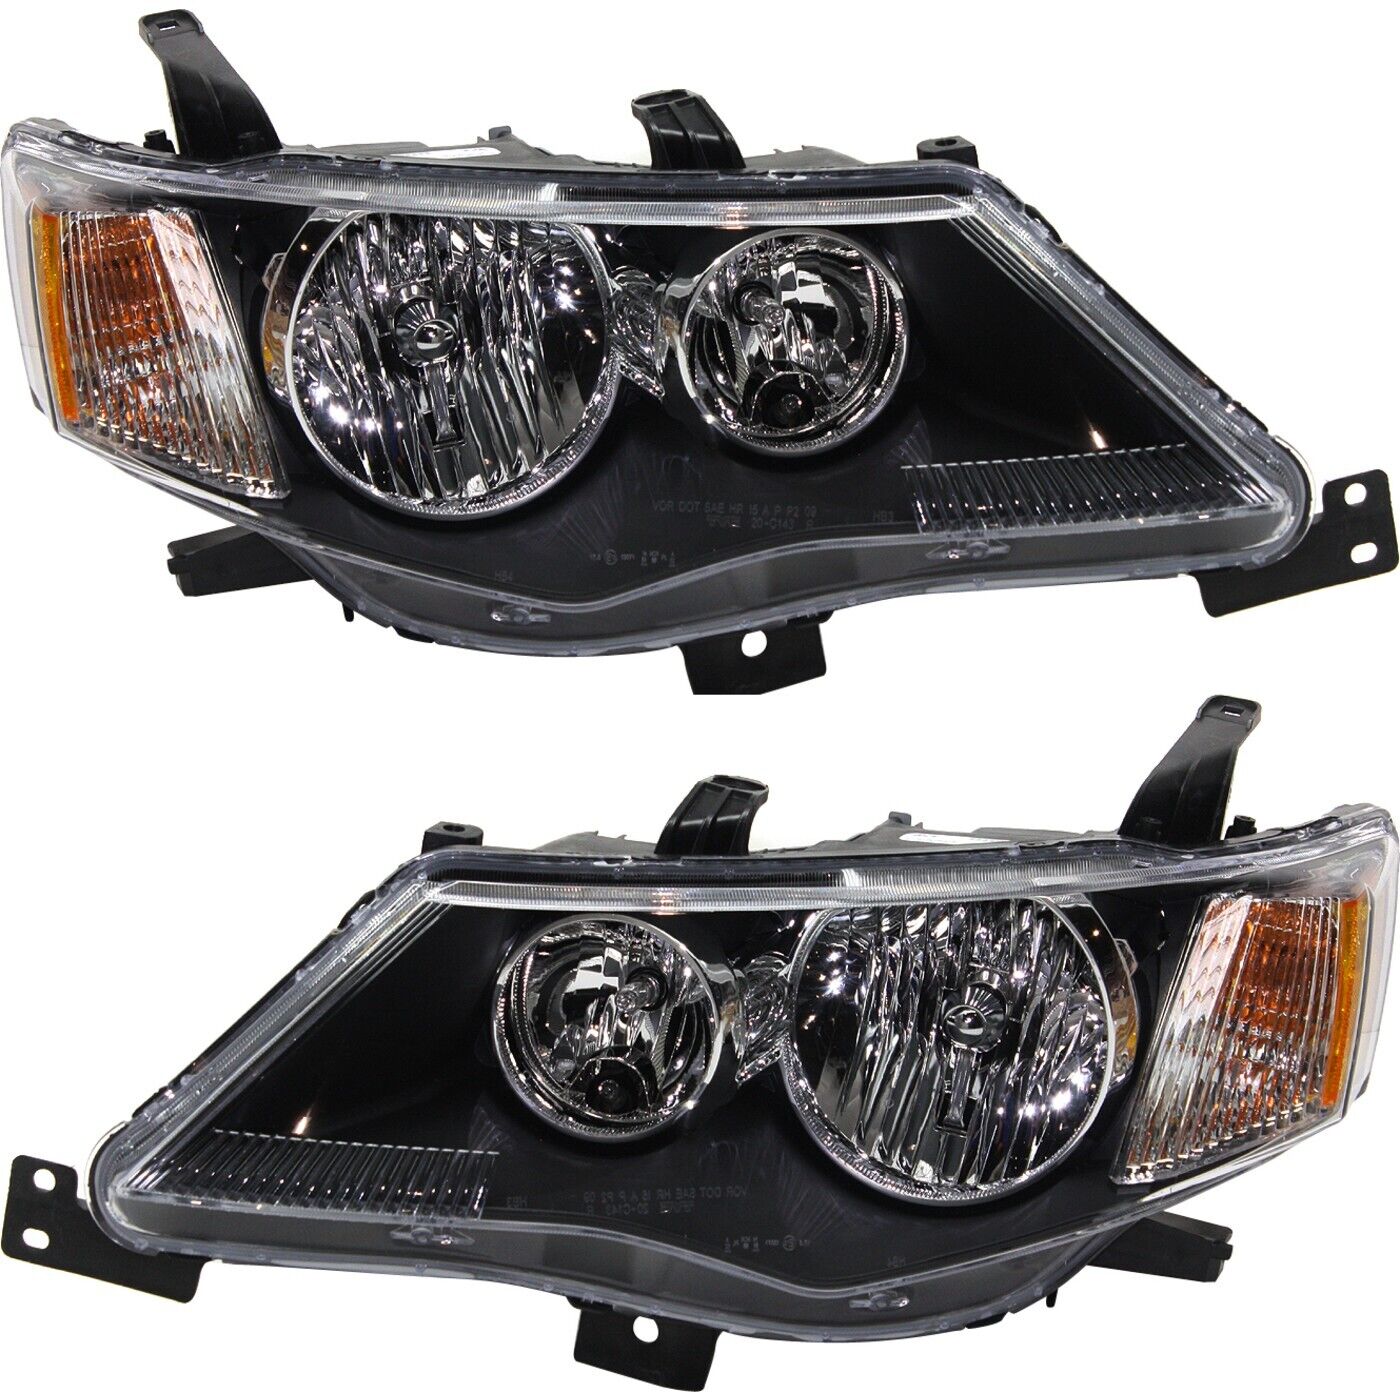 Headlight Set For 2007-2009 Mitsubishi Outlander Left and Right With Bulb 2Pc